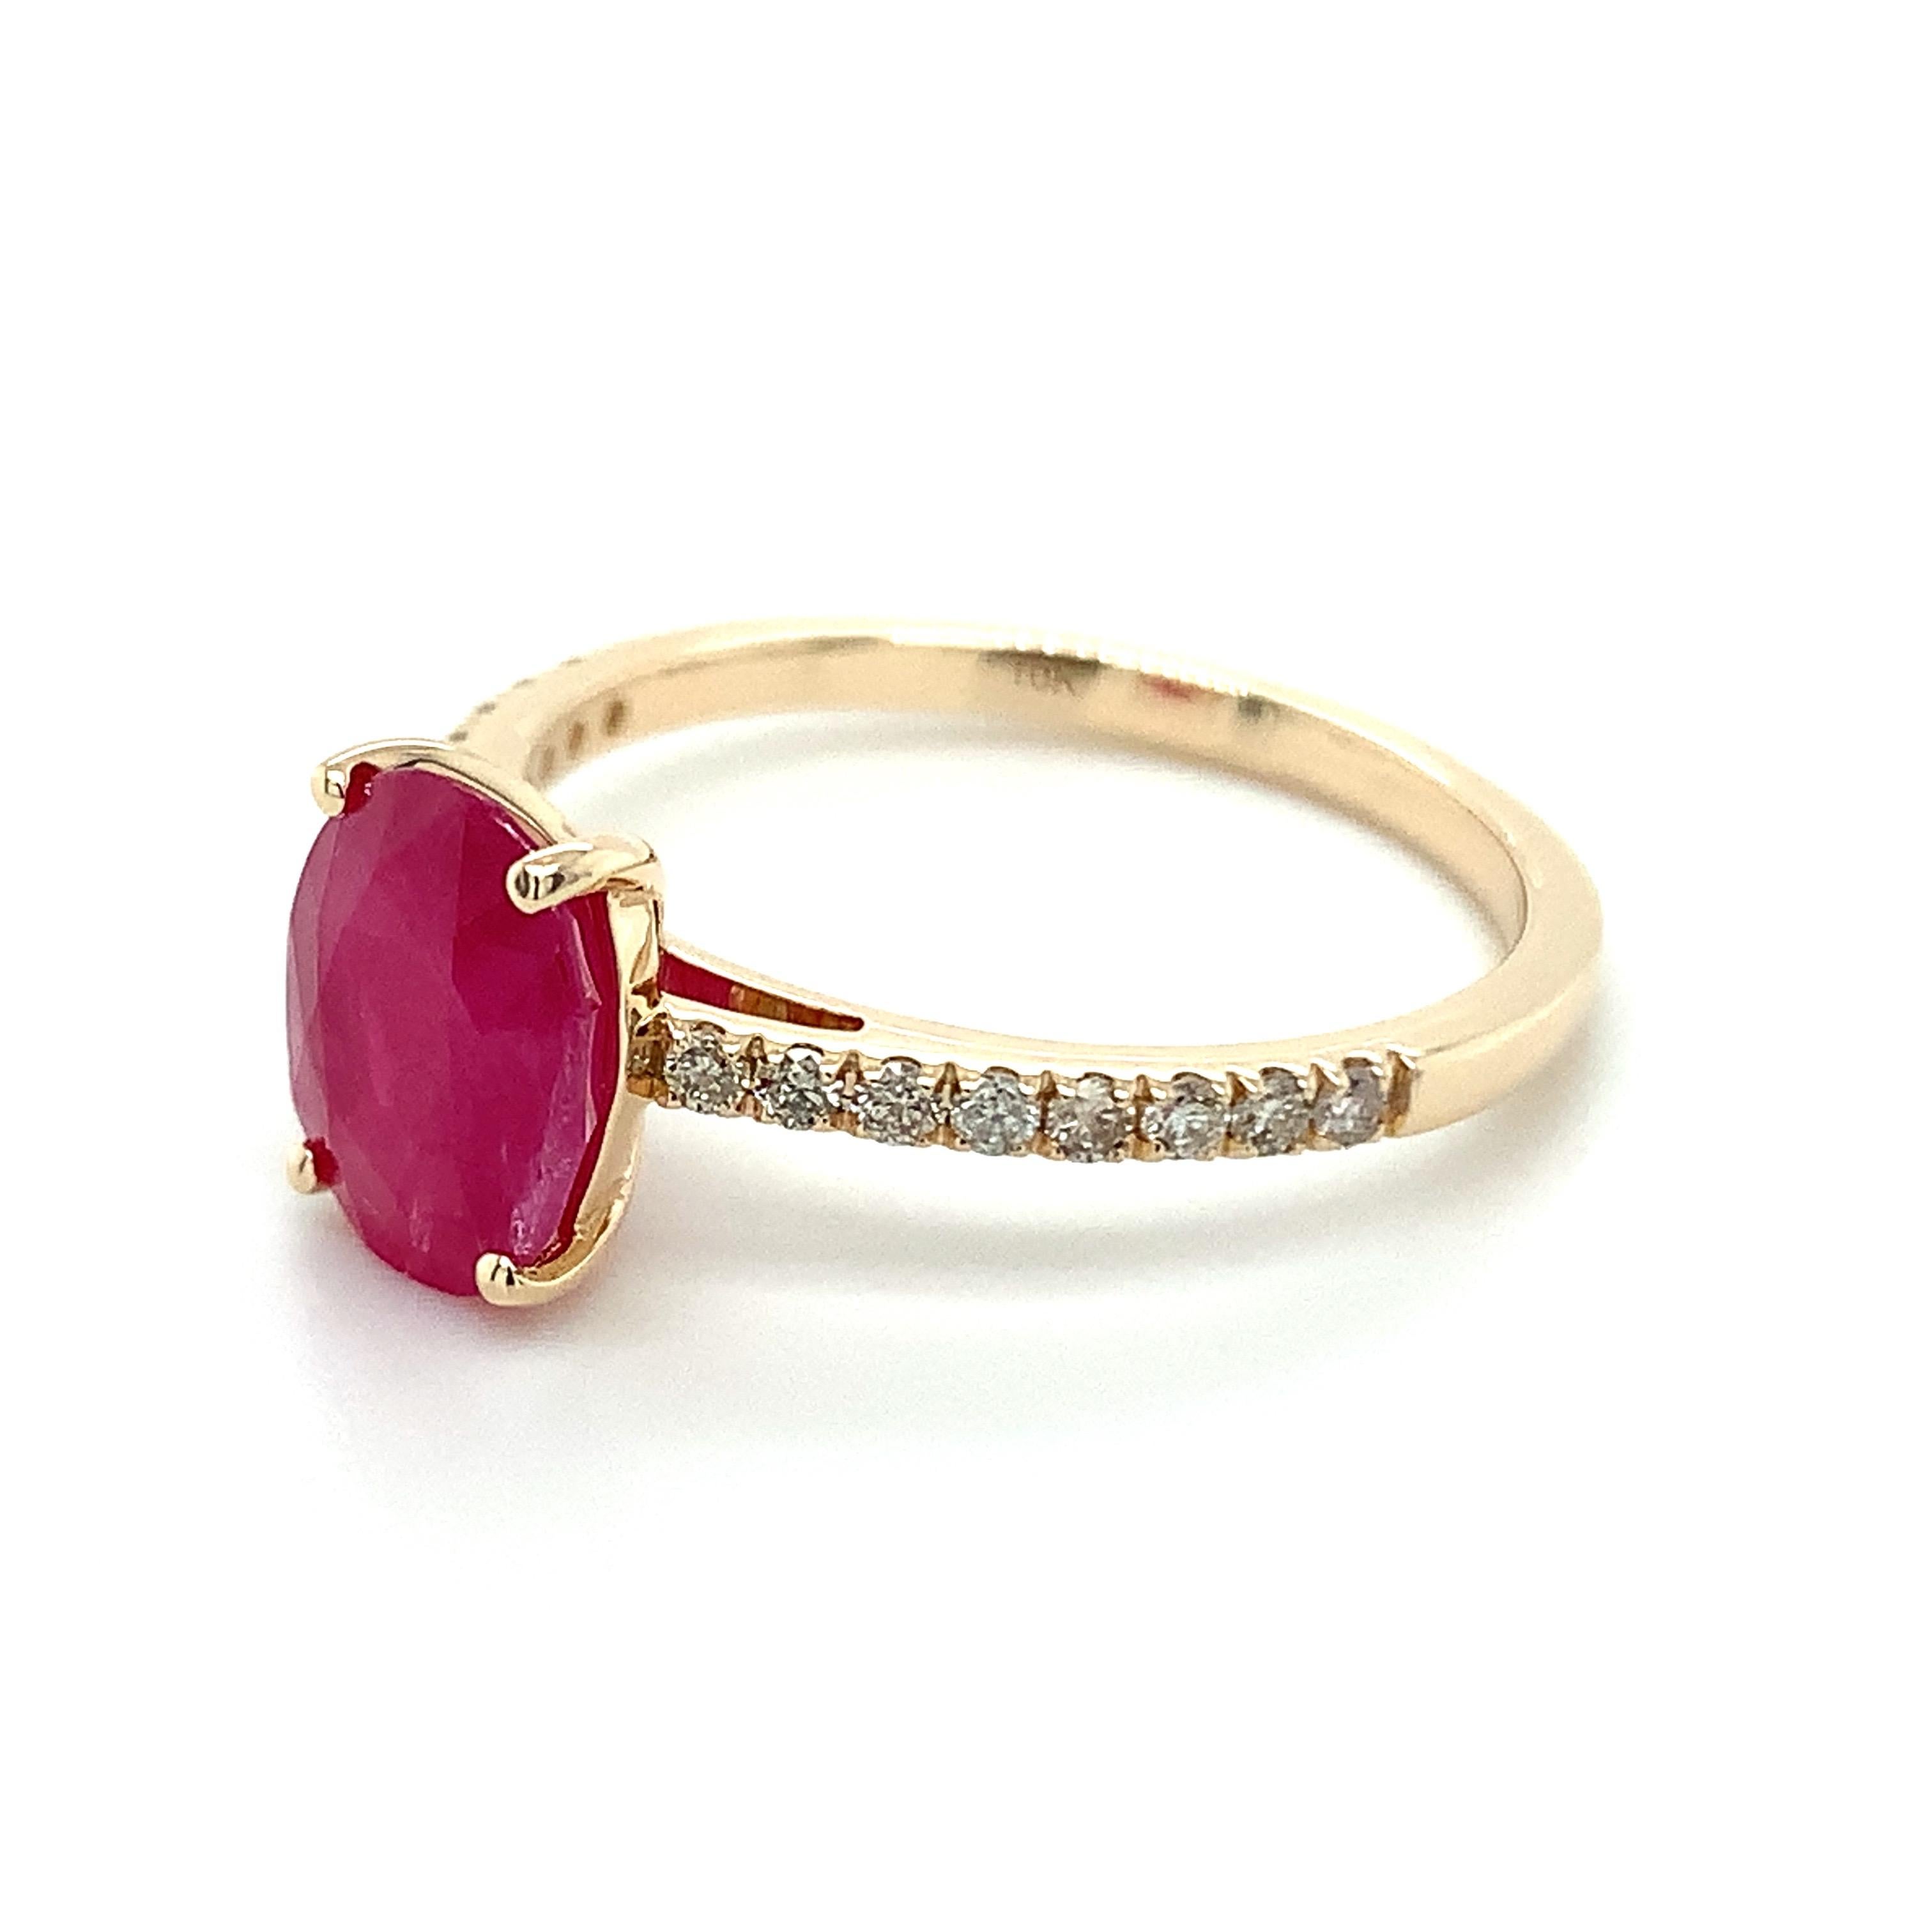 Oval shape Ruby gemstone beautifully crafted in a 10K yellow gold ring with natural diamonds.

An exquisite red color birthstone for July. Believed to convey a status of power & wealth. Explore a vast range of precious stone Jewelry in our store.